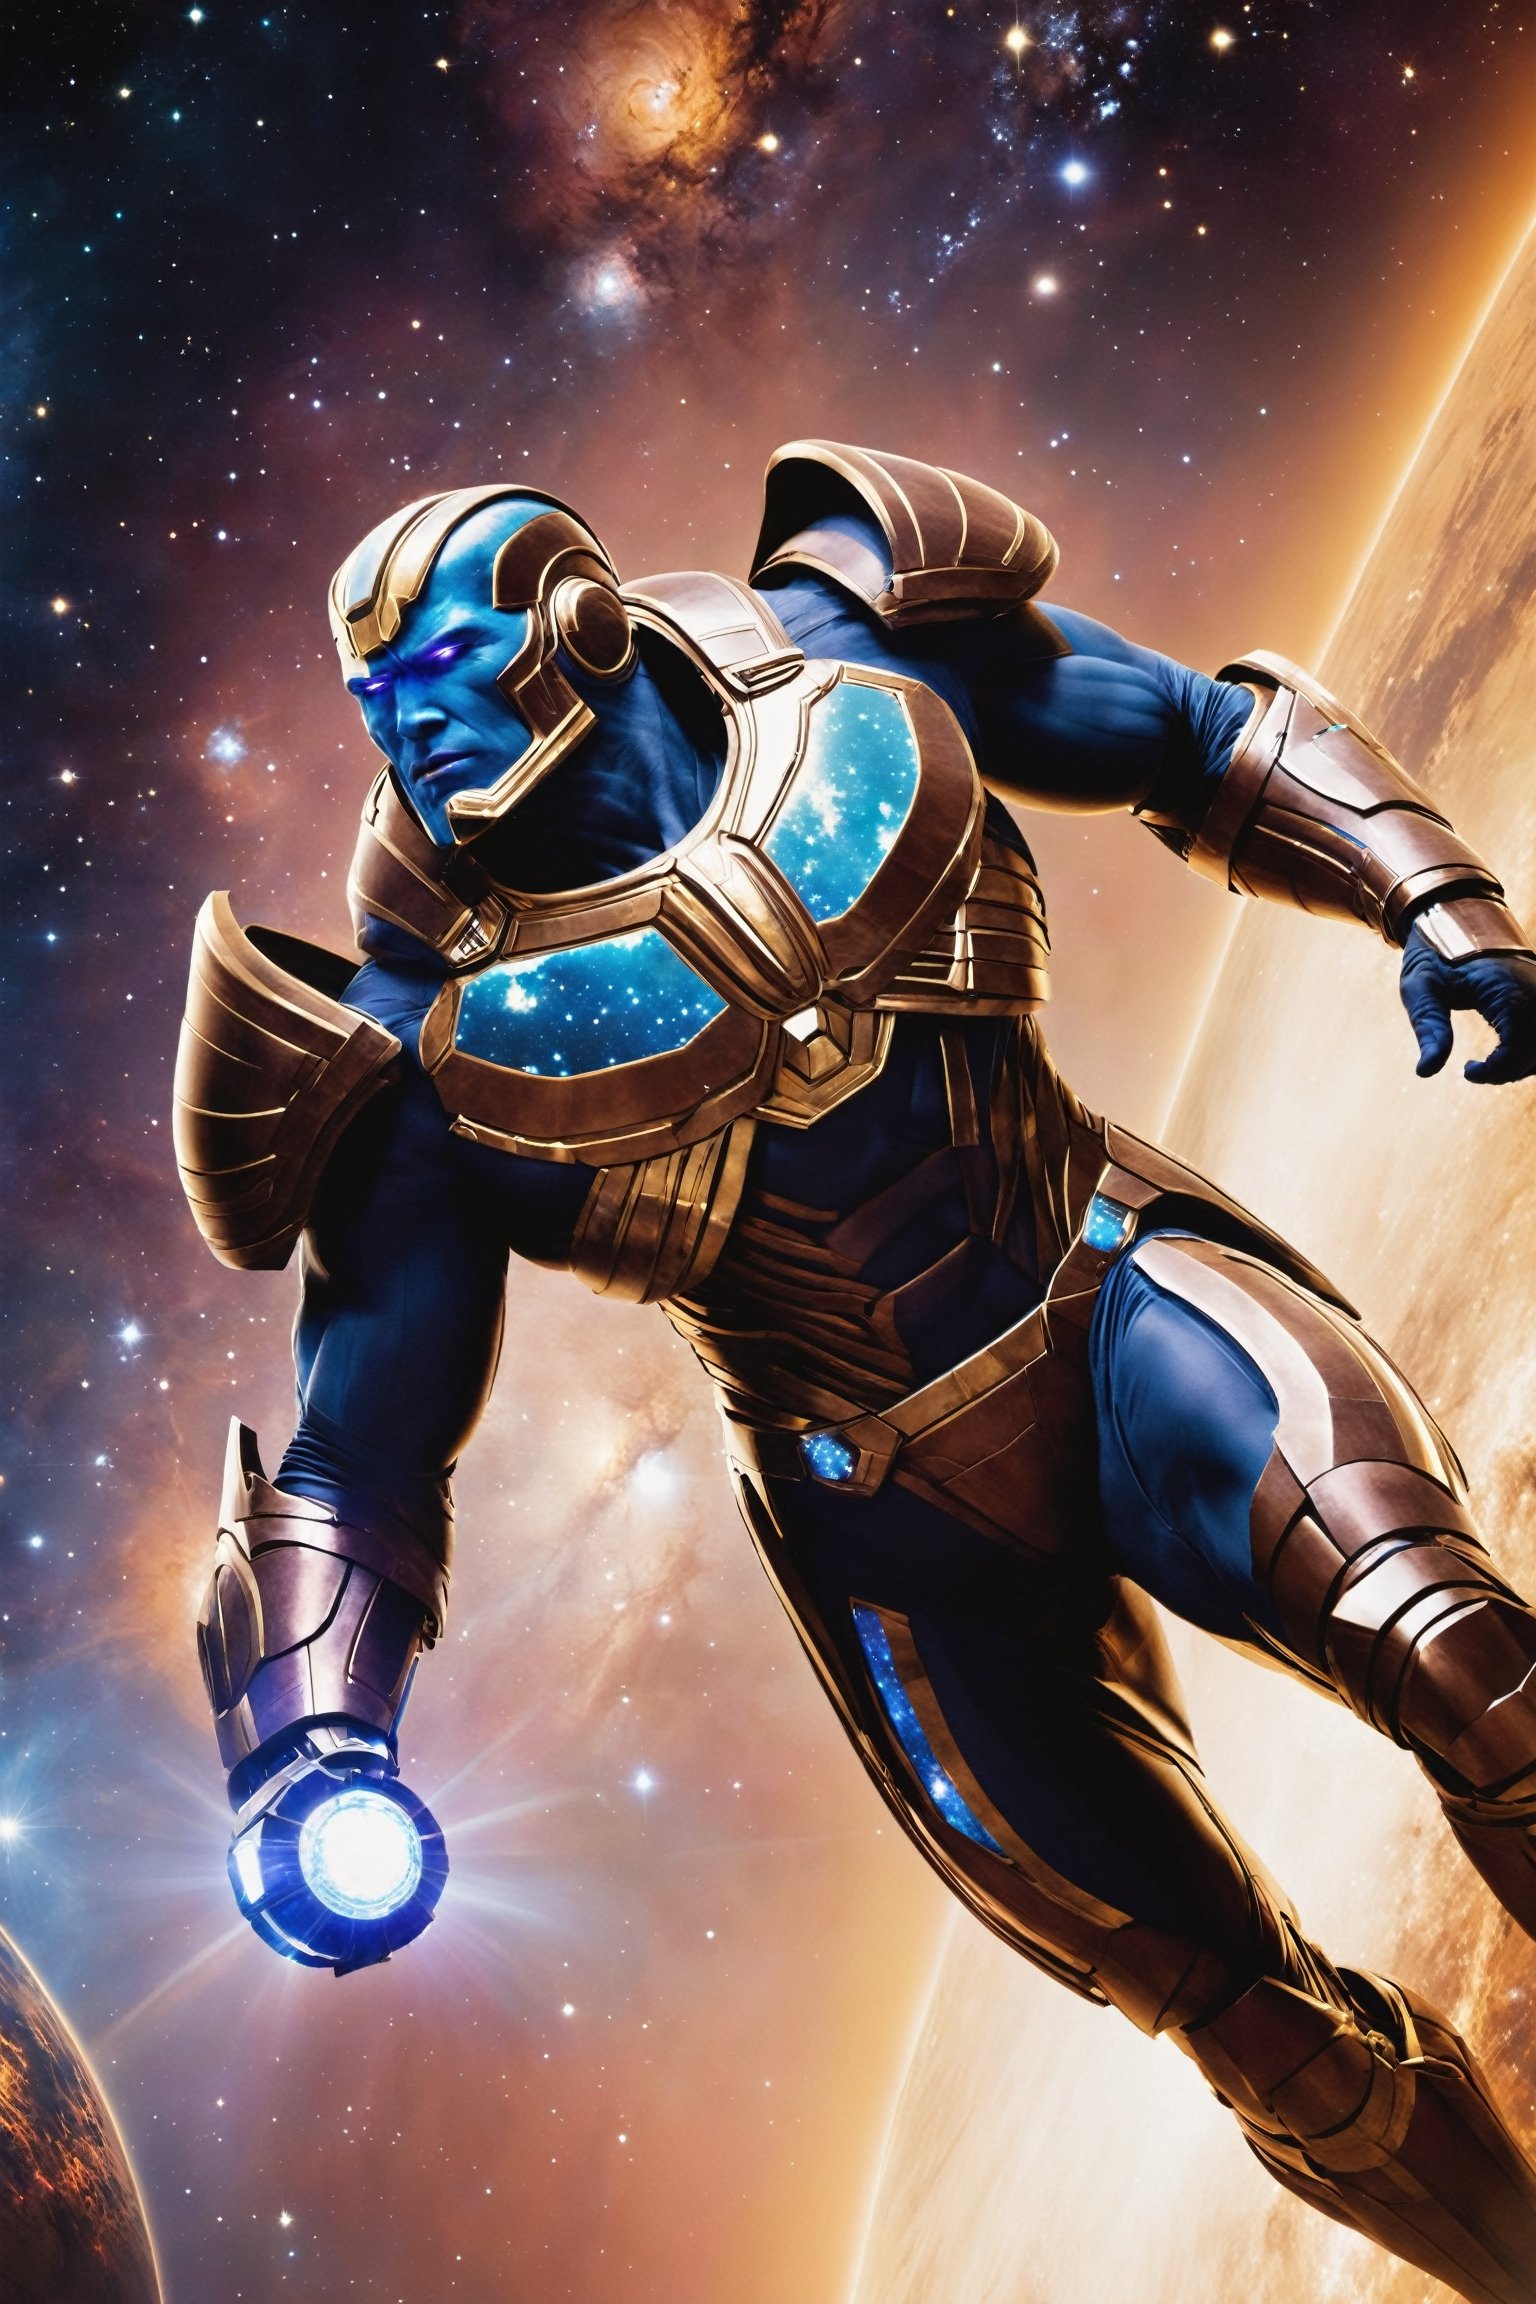 Nebula Titan, a muscular cosmic warrior, combines the strength of a titan with the advanced technology of a space explorer. Adorned in a futuristic suit with celestial patterns, Nebula Titan wields a colossal energy hammer, smashing through enemies in the vast expanse of the galaxy.